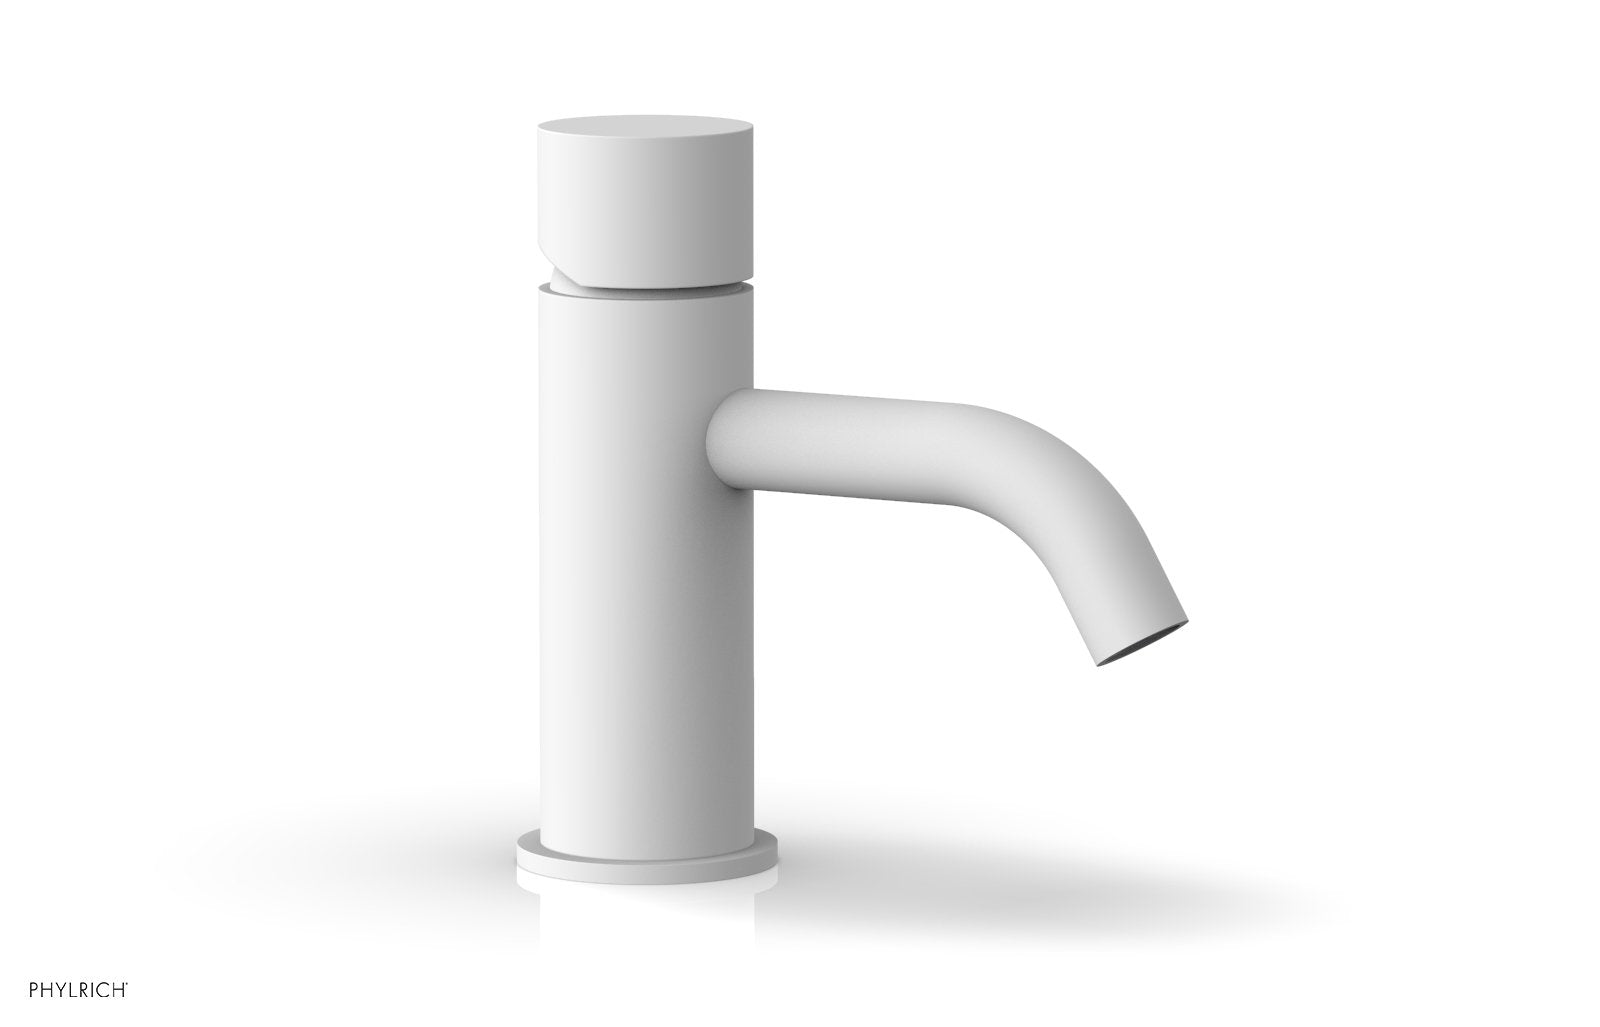 Phylrich BASIC II Single Hole Lavatory Faucet, Smooth Handle